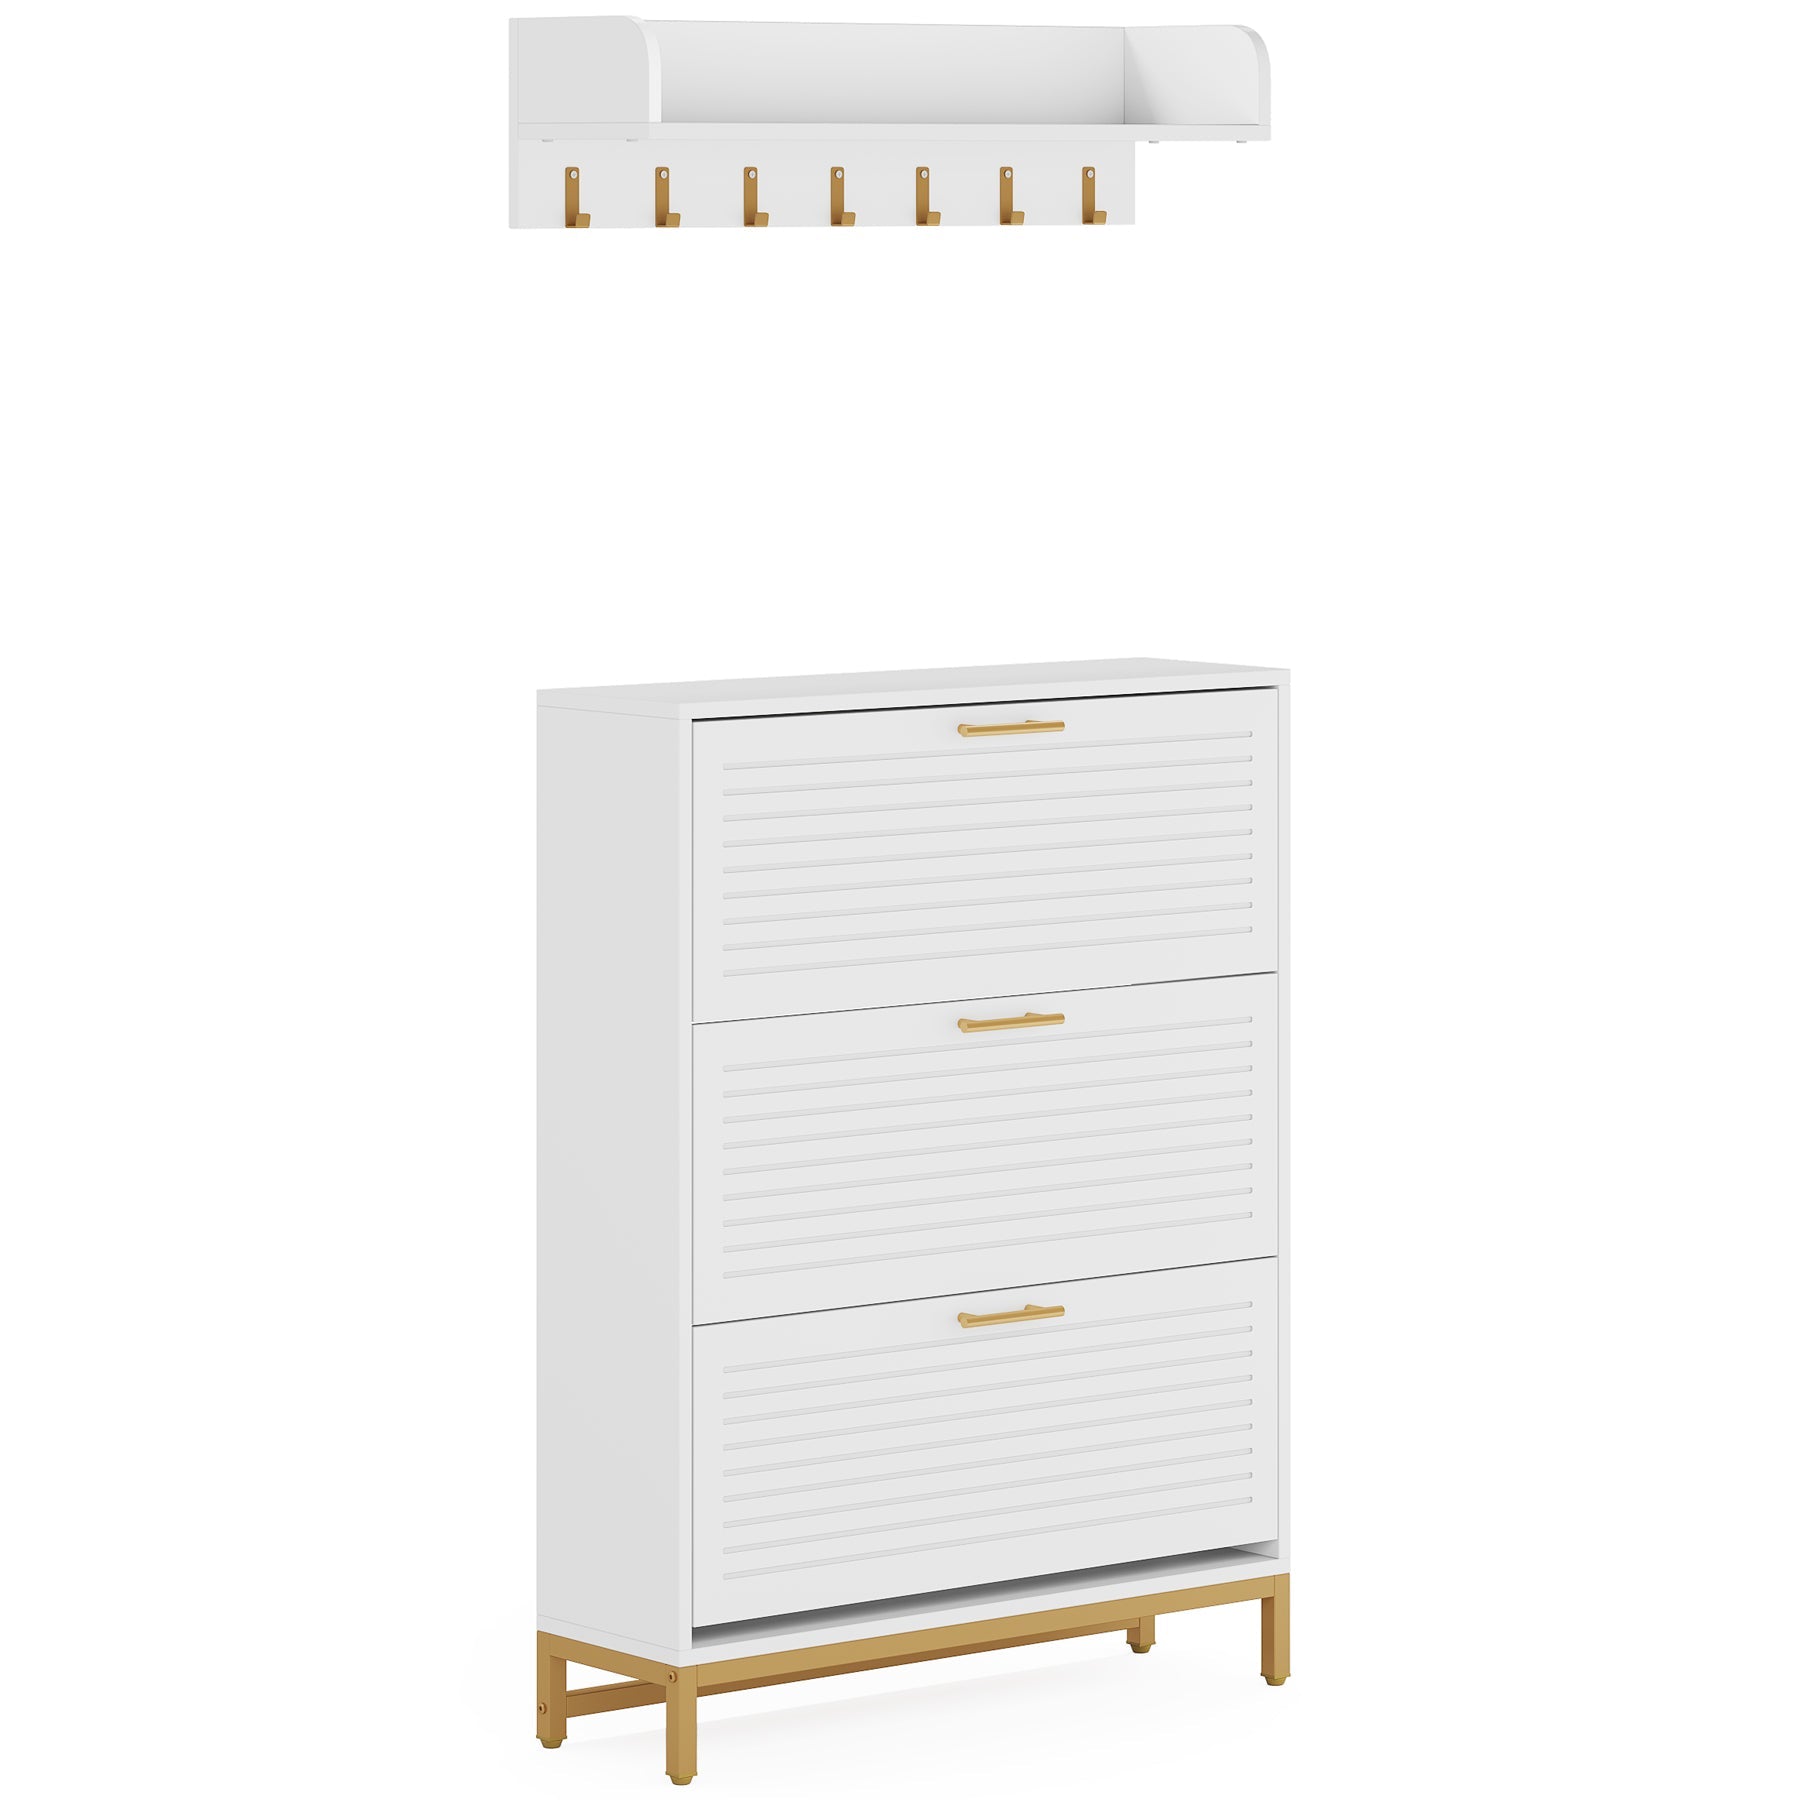 Modern Shoe Cabinet with Wall Mounted Coat Rack & Flip Drawer